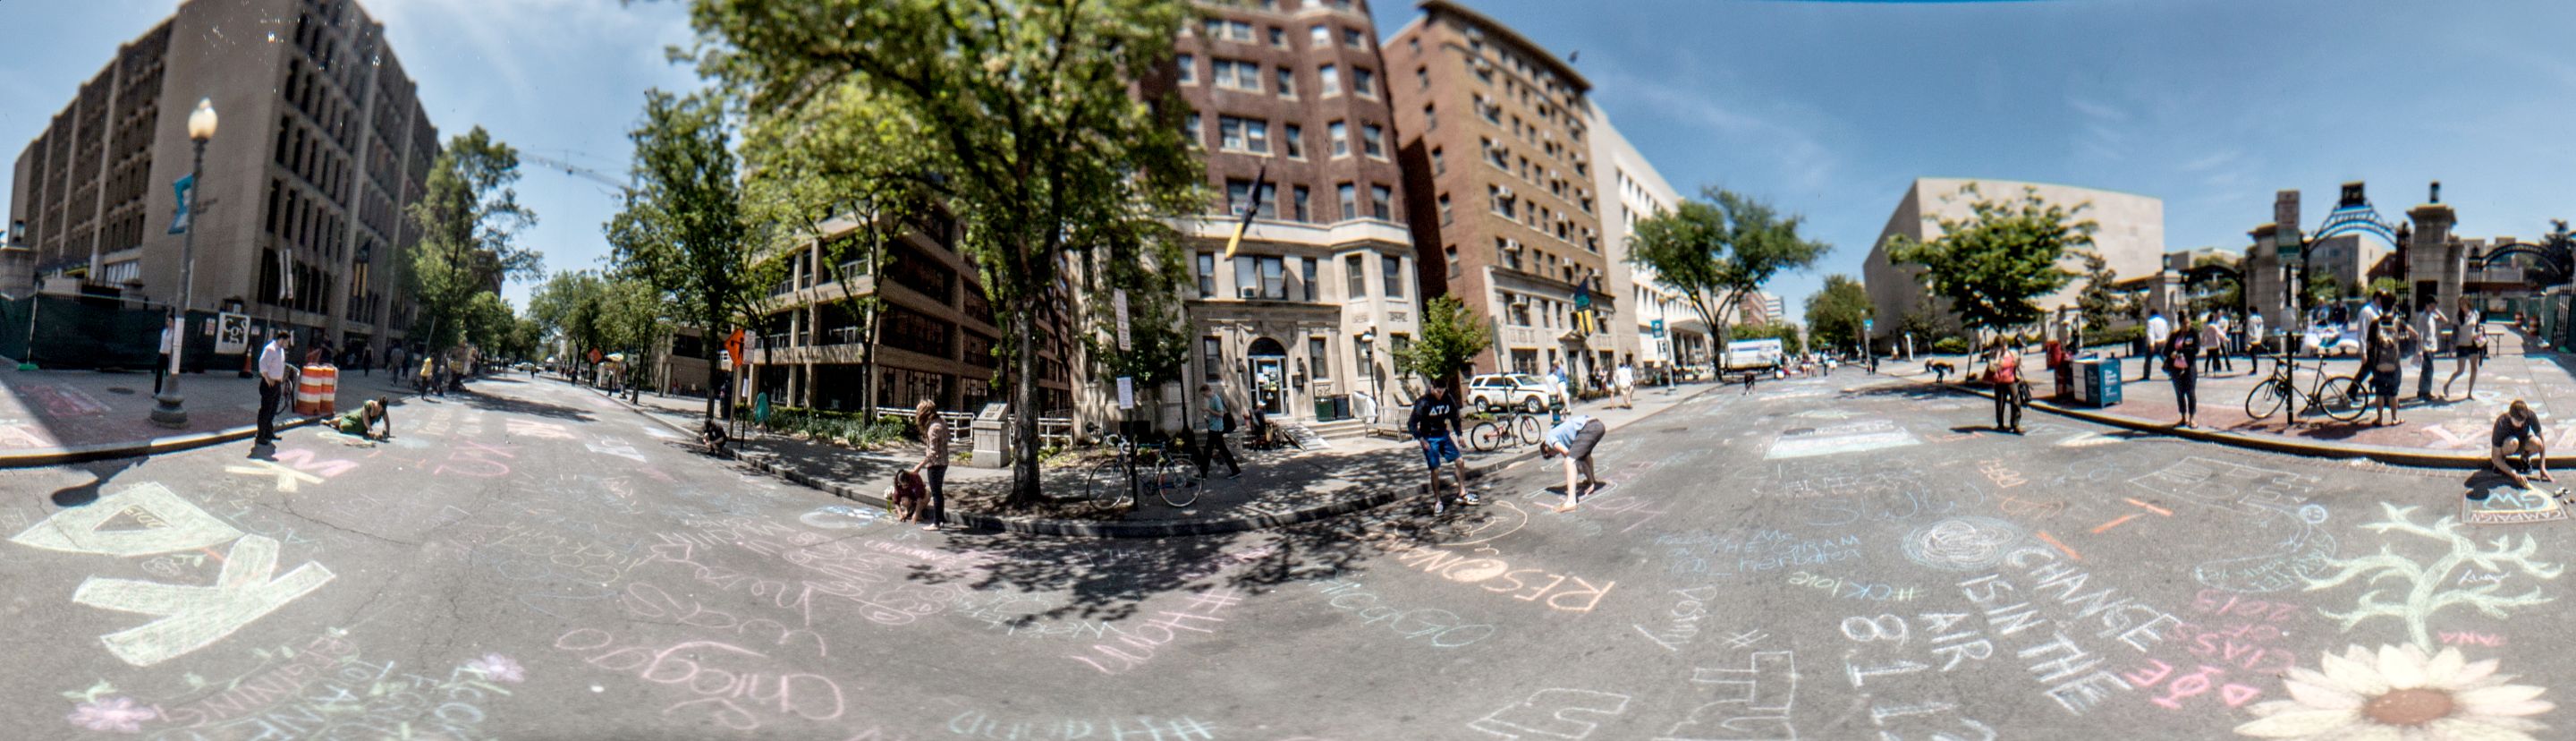 A panoramic view of H Street with chalk drawings on the road.